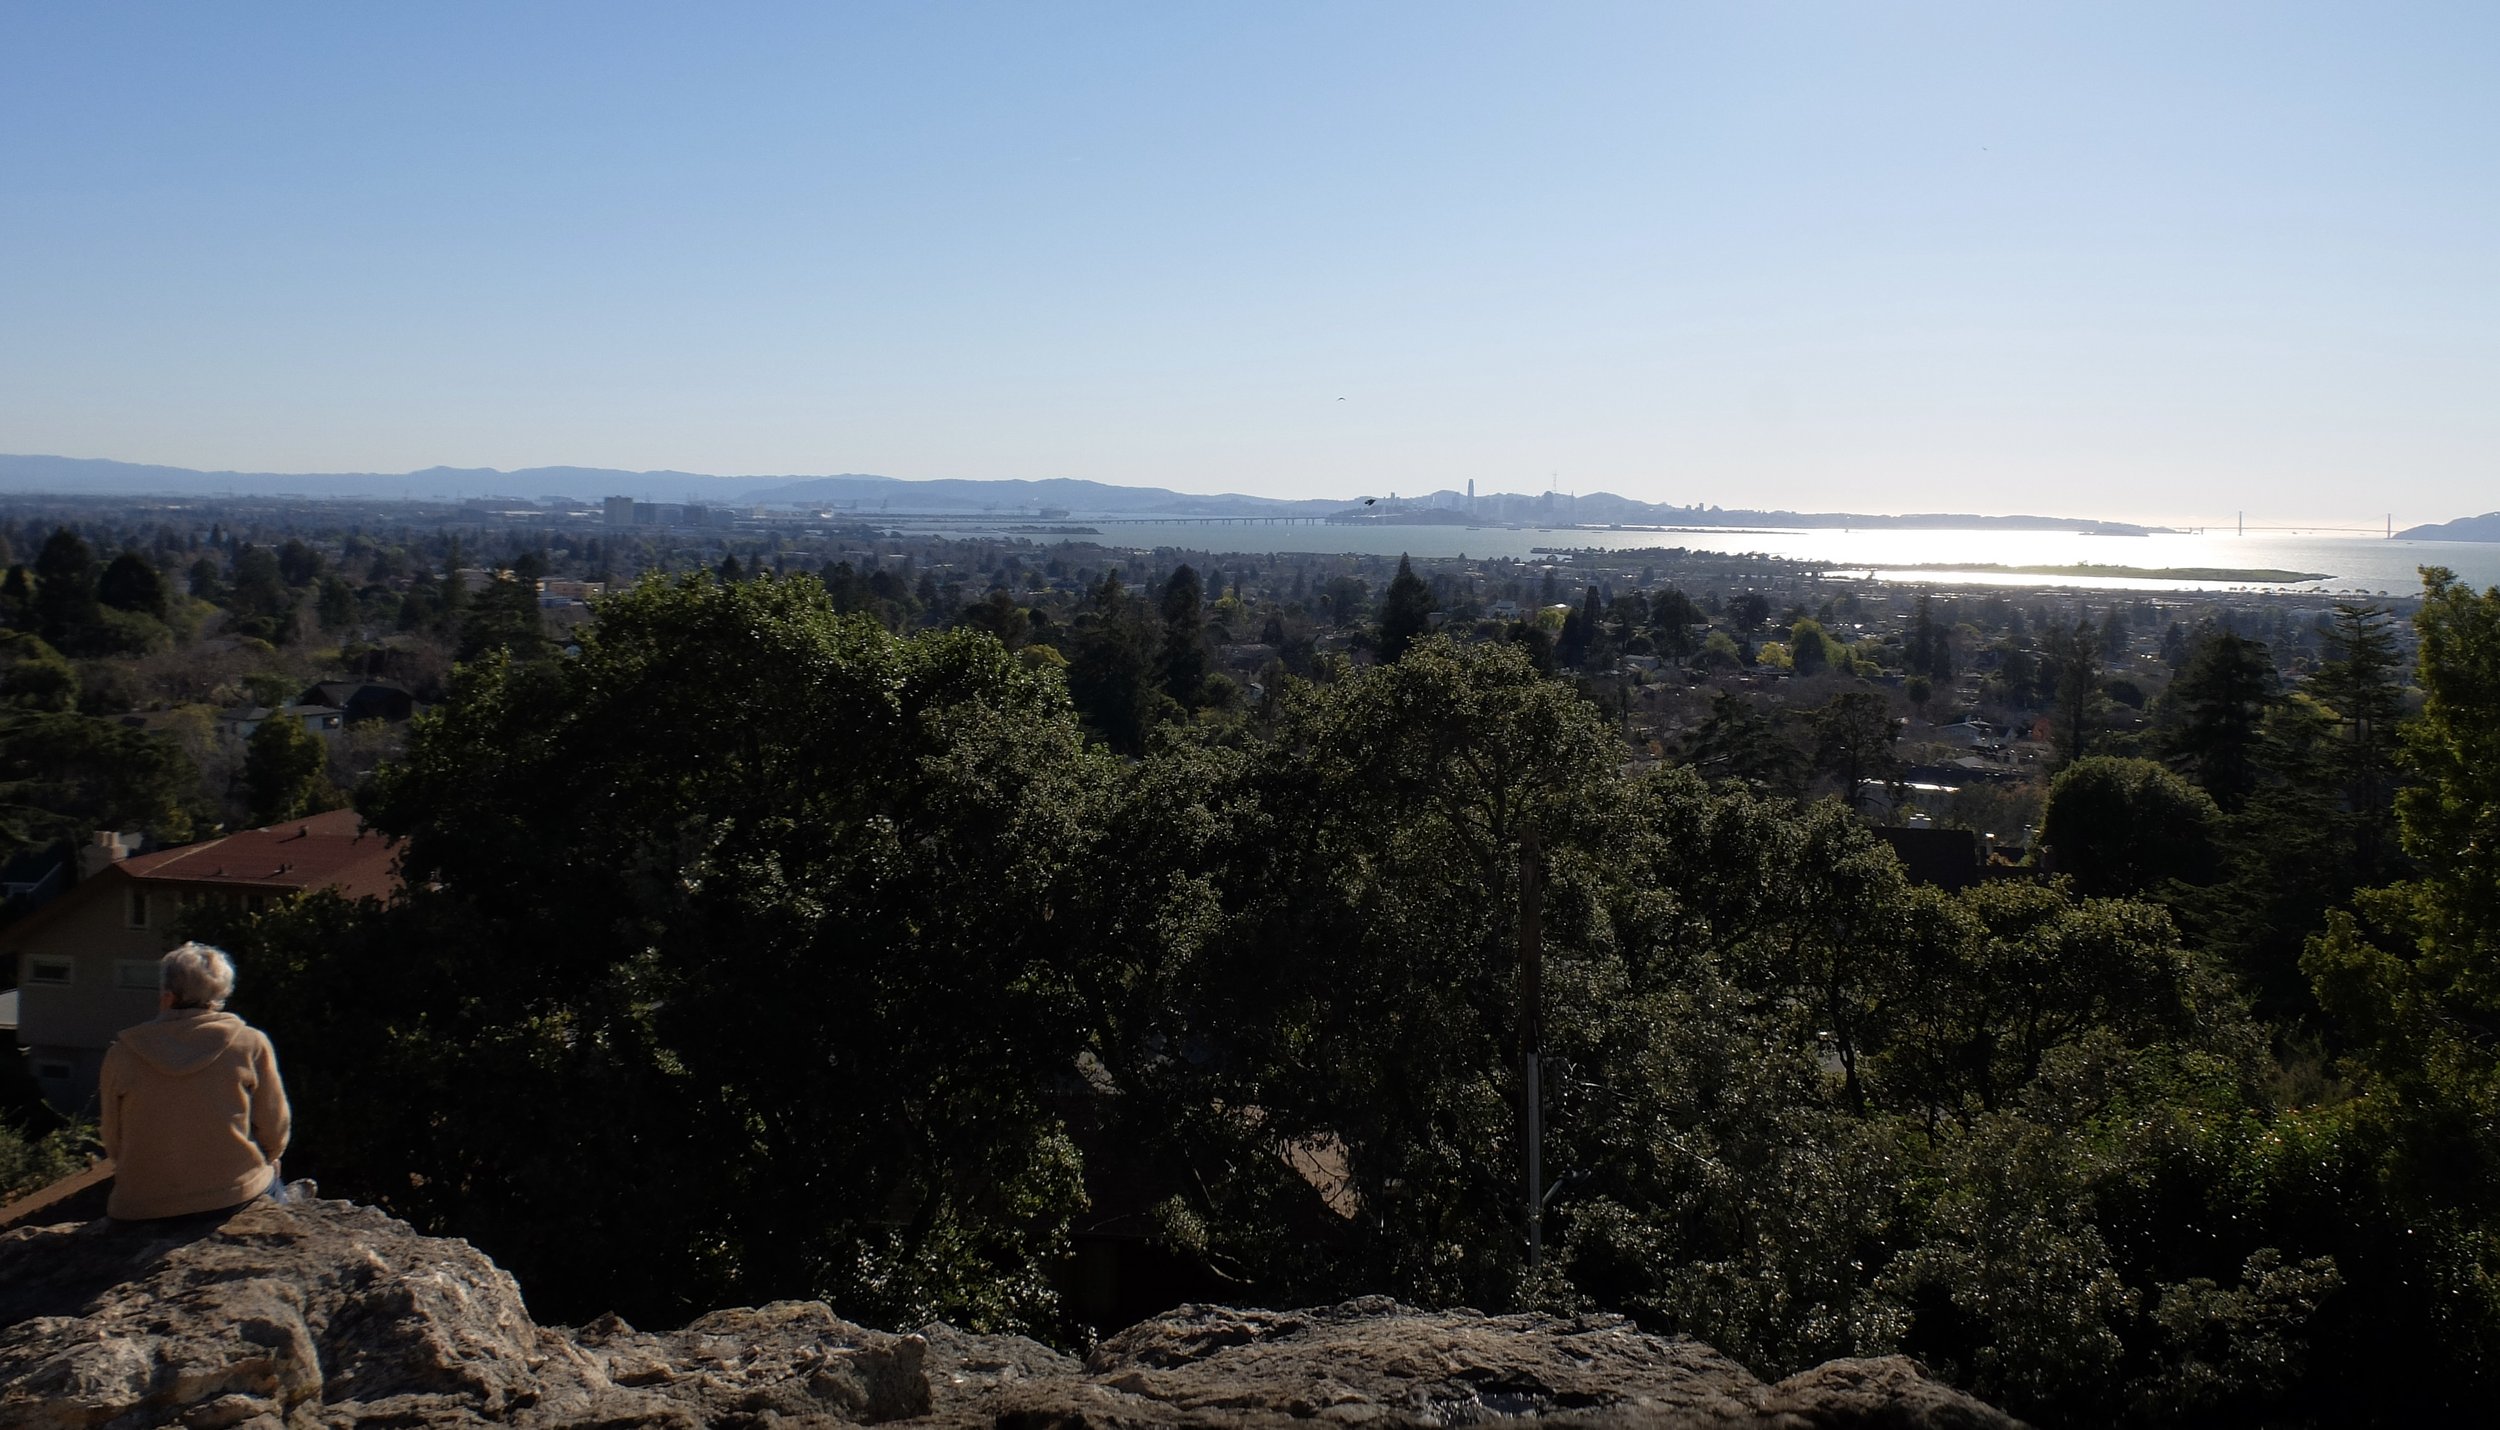 The view of San Francisco Bay from Indian Rock Park.